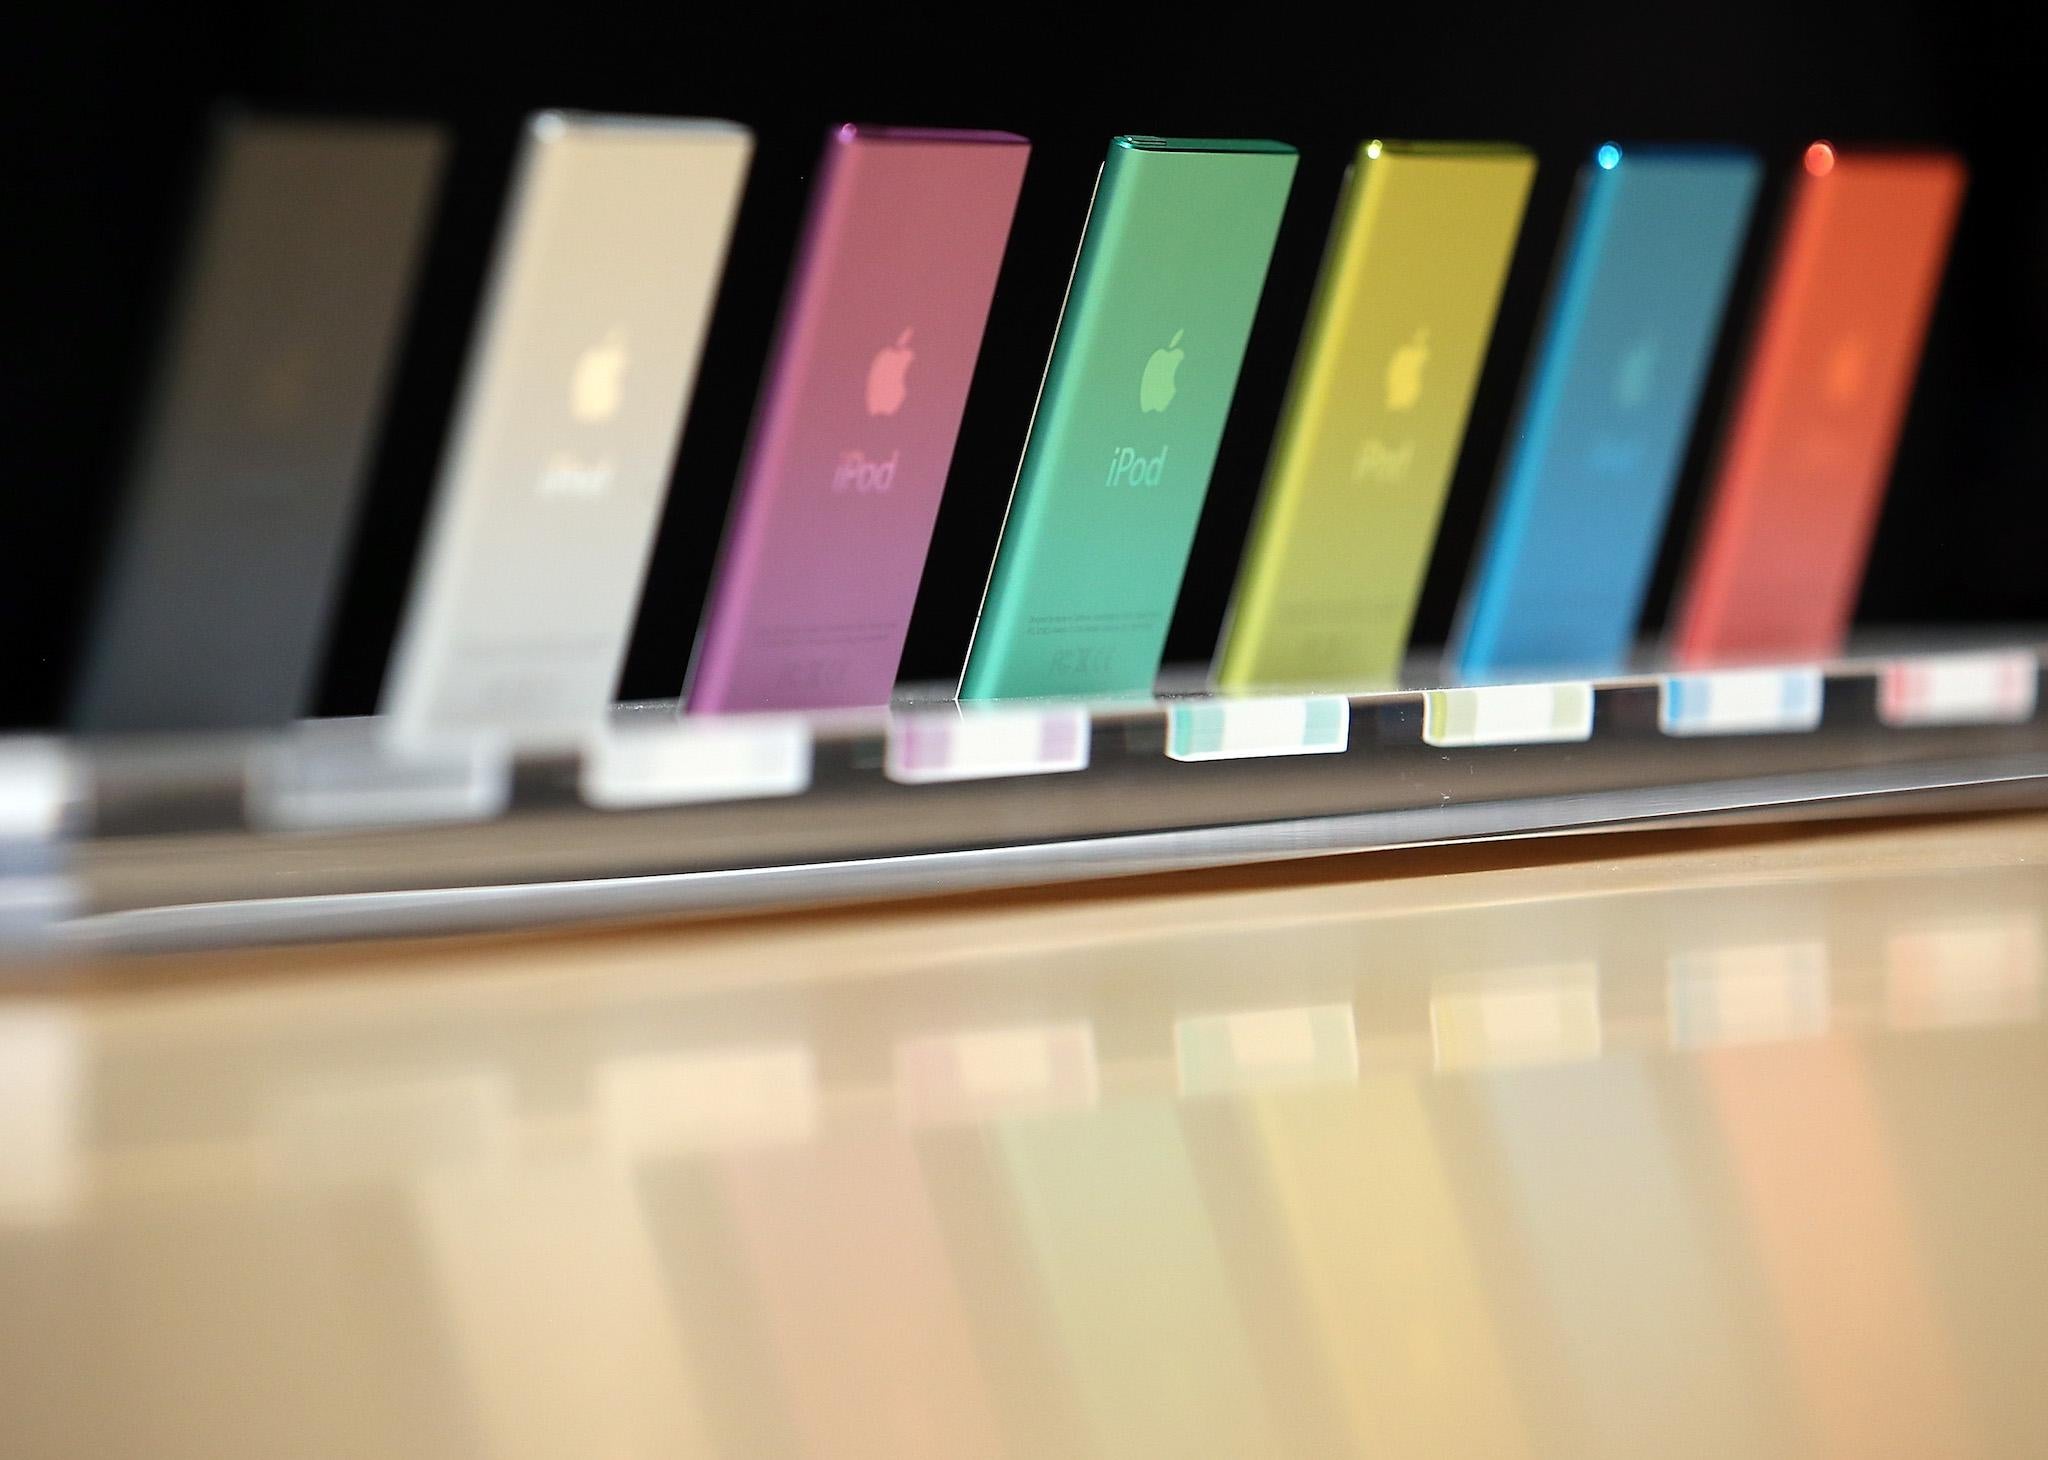 iPods are displayed after an Apple special event at the Yerba Buena Center for the Arts on September 12, 2012 in San Francisco, California